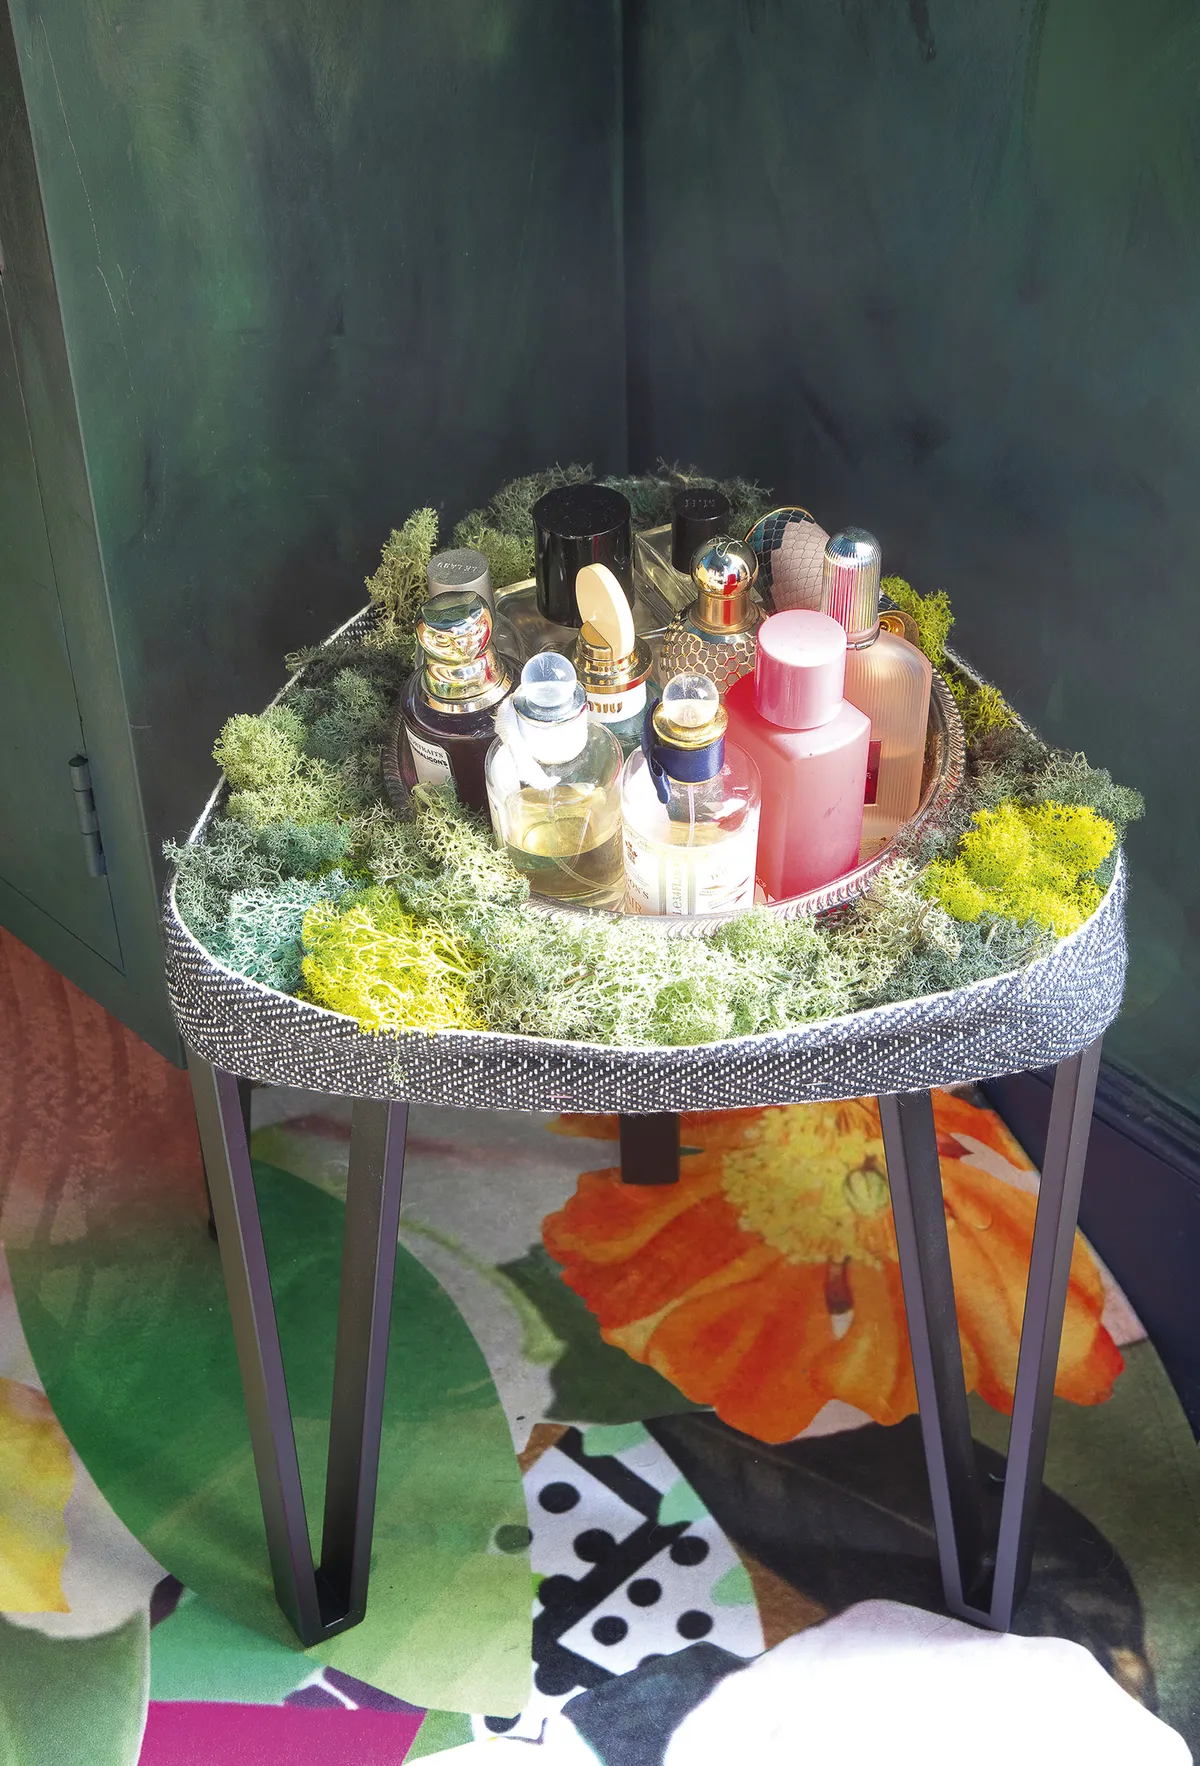 Dodo has created a fun display with her perfume bottles, surrounding the collection with moss that enthusiasts use on train sets